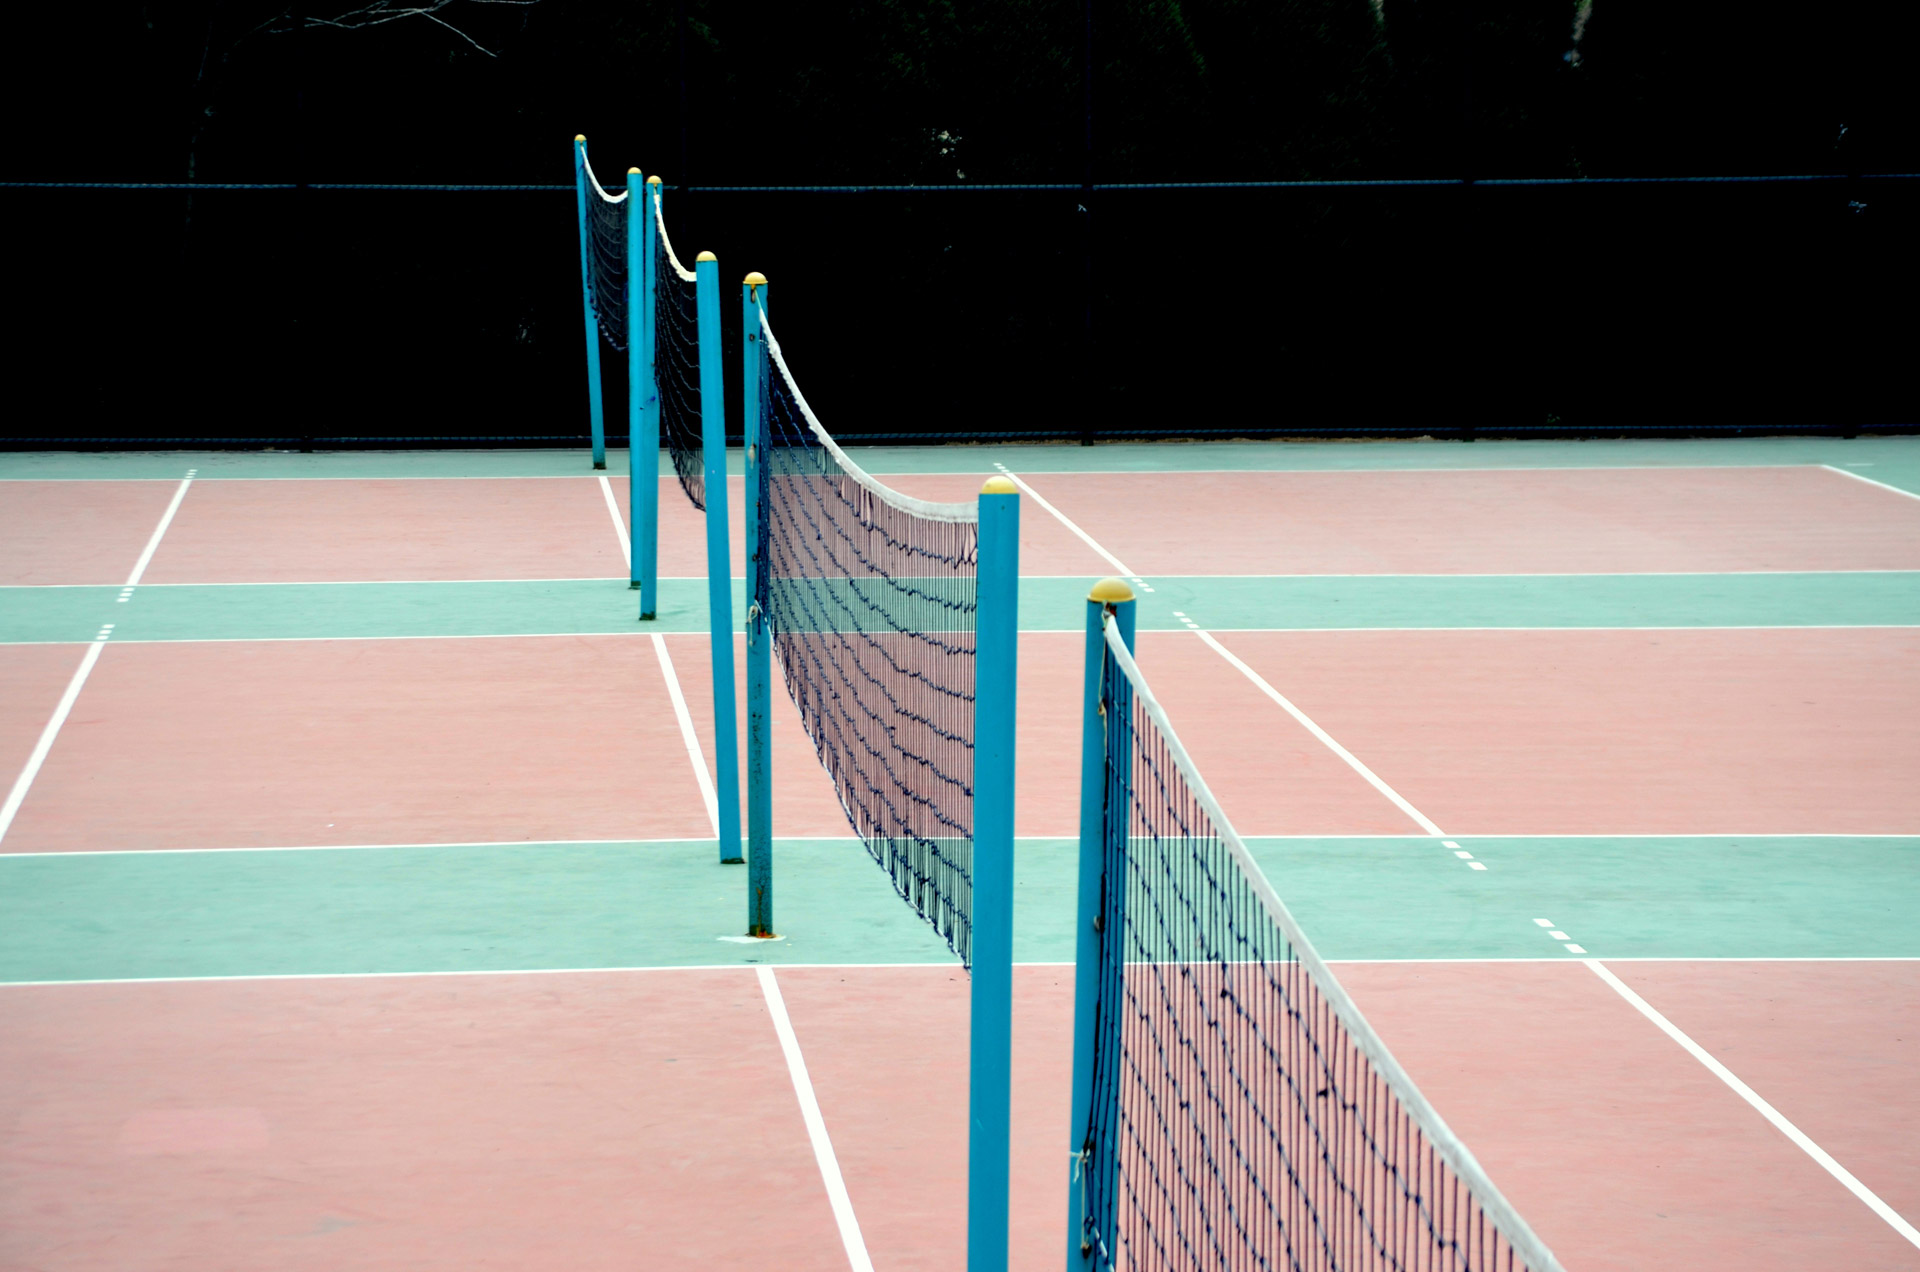 Court,courts,volleyball,badminton,net - free image from 